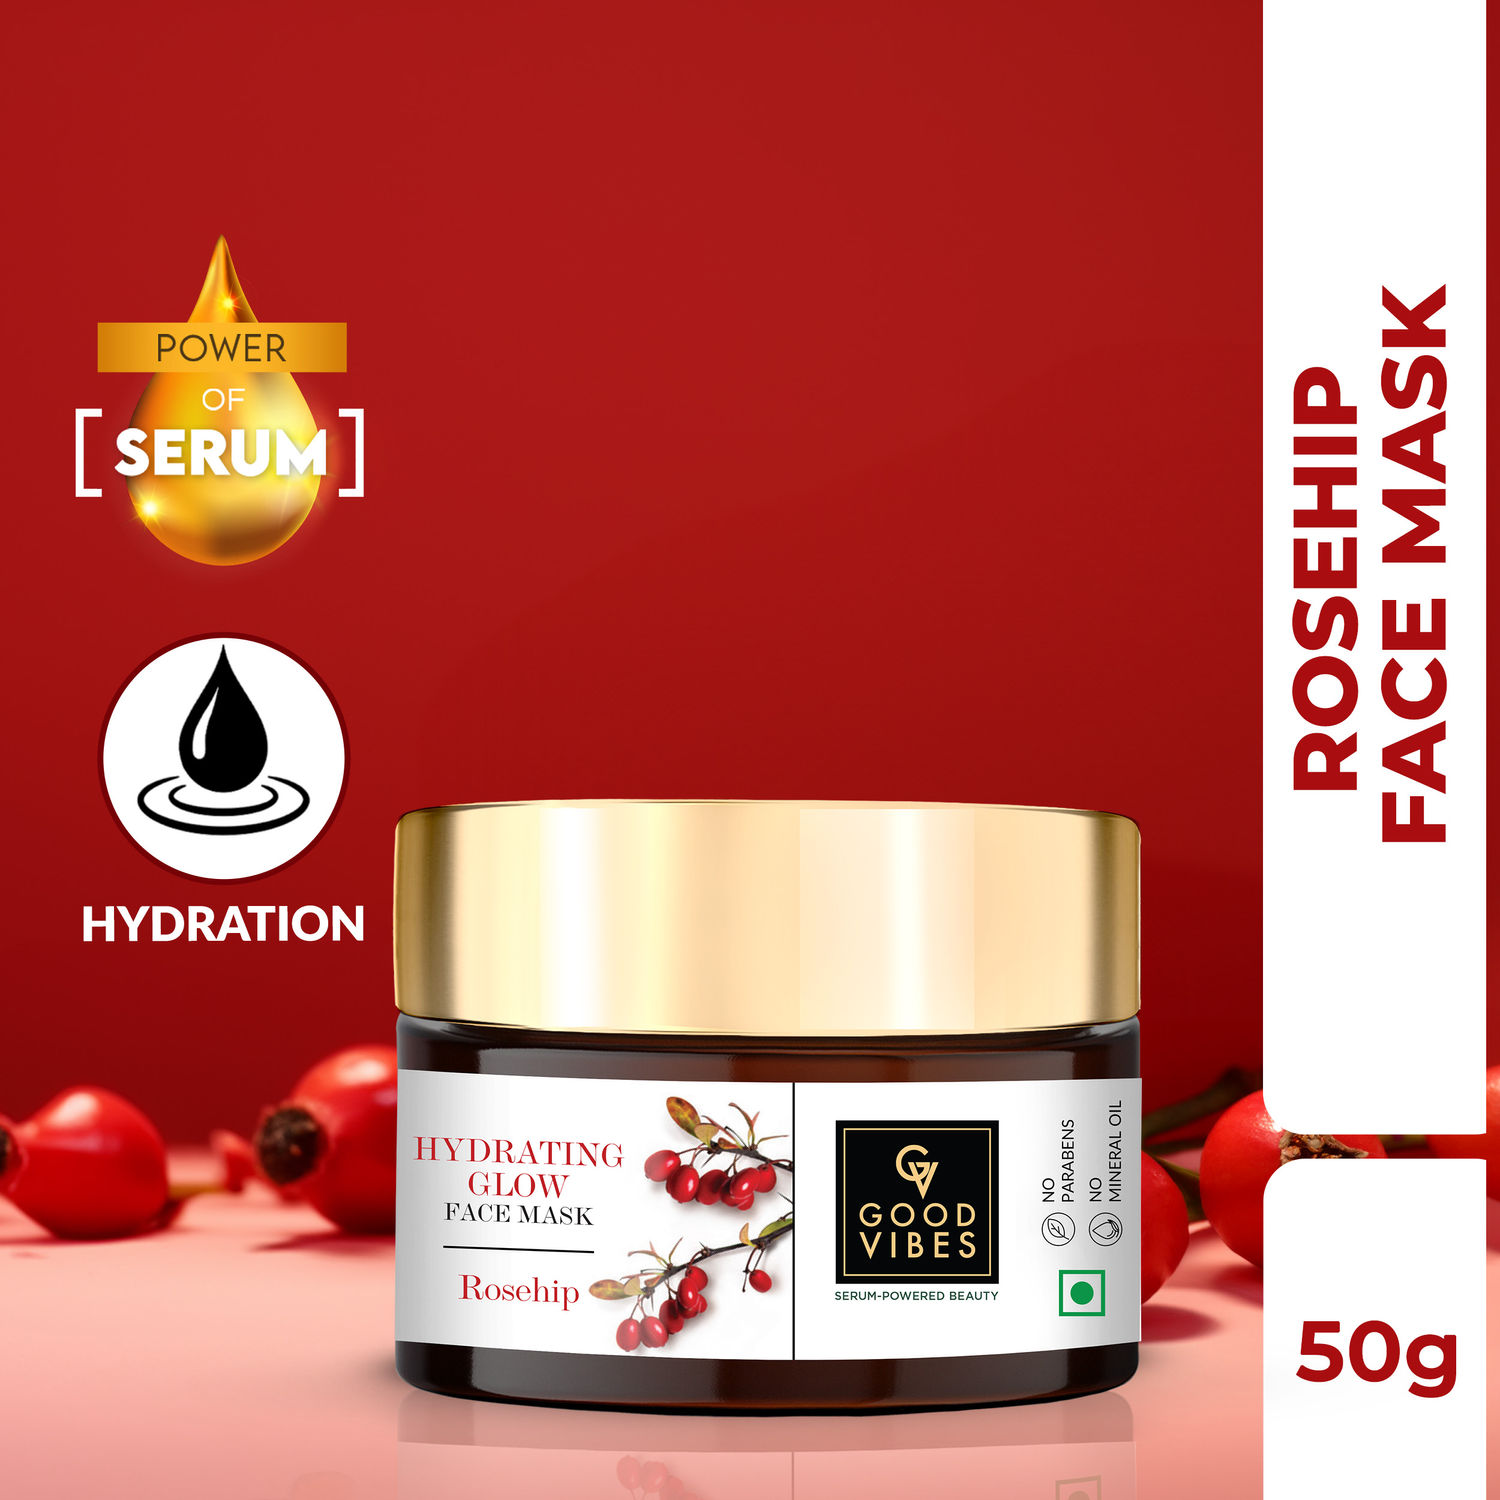 Buy Good Vibes Serum Hydrating Glow Face Mask Rosehip with Power Of Serum (50 g) - Purplle